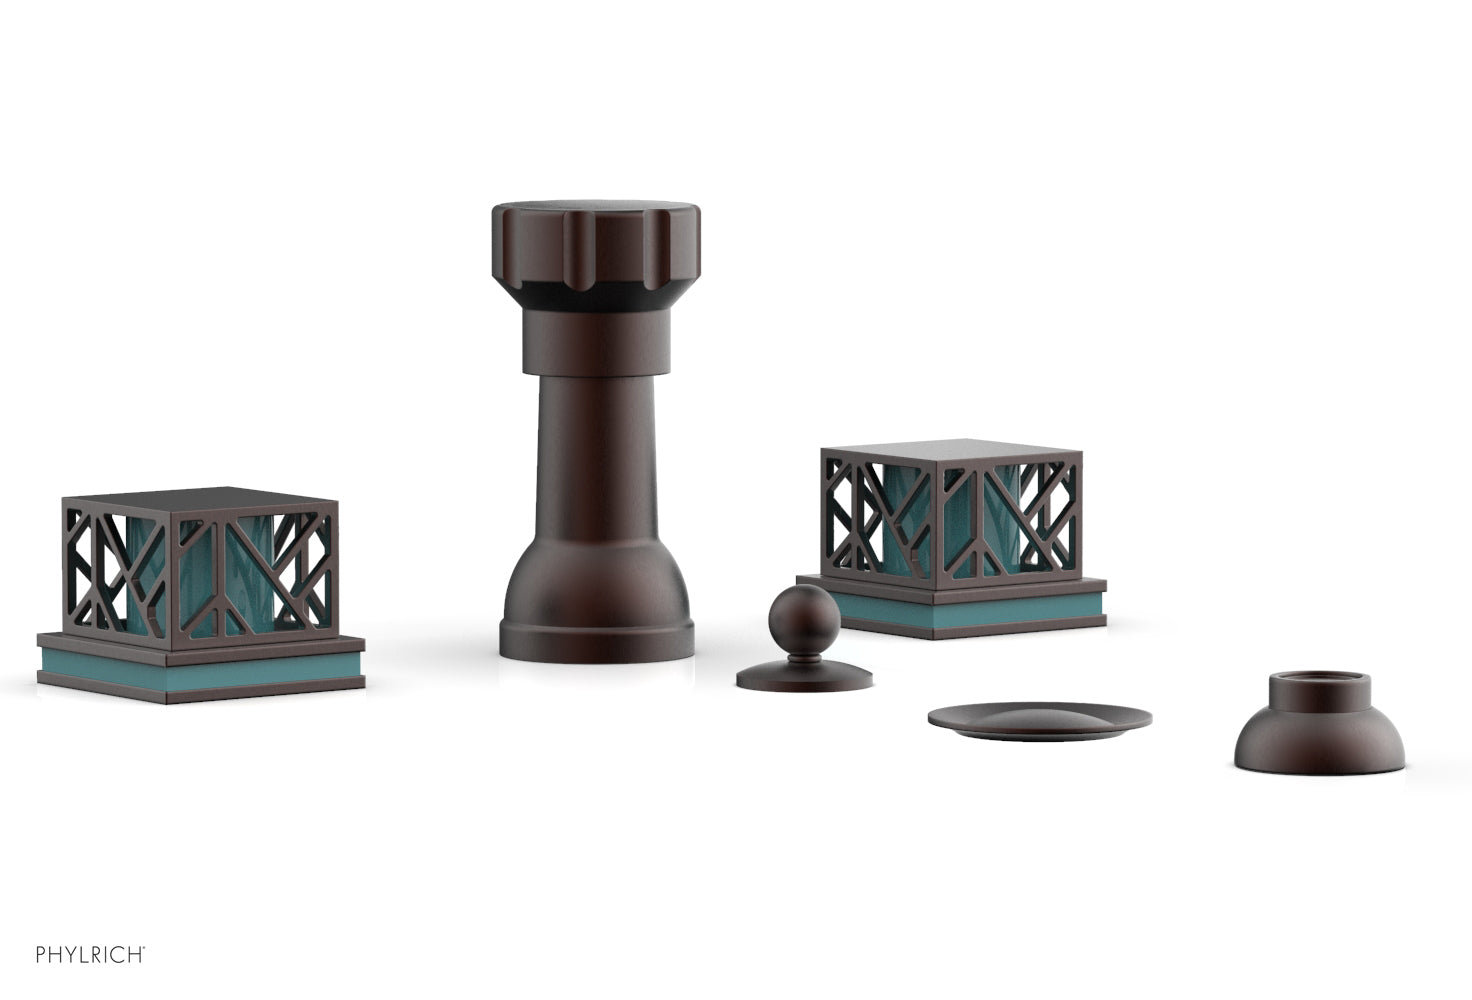 Phylrich JOLIE Four Hole Bidet Set - Square Handles with "Turquoise Accents"